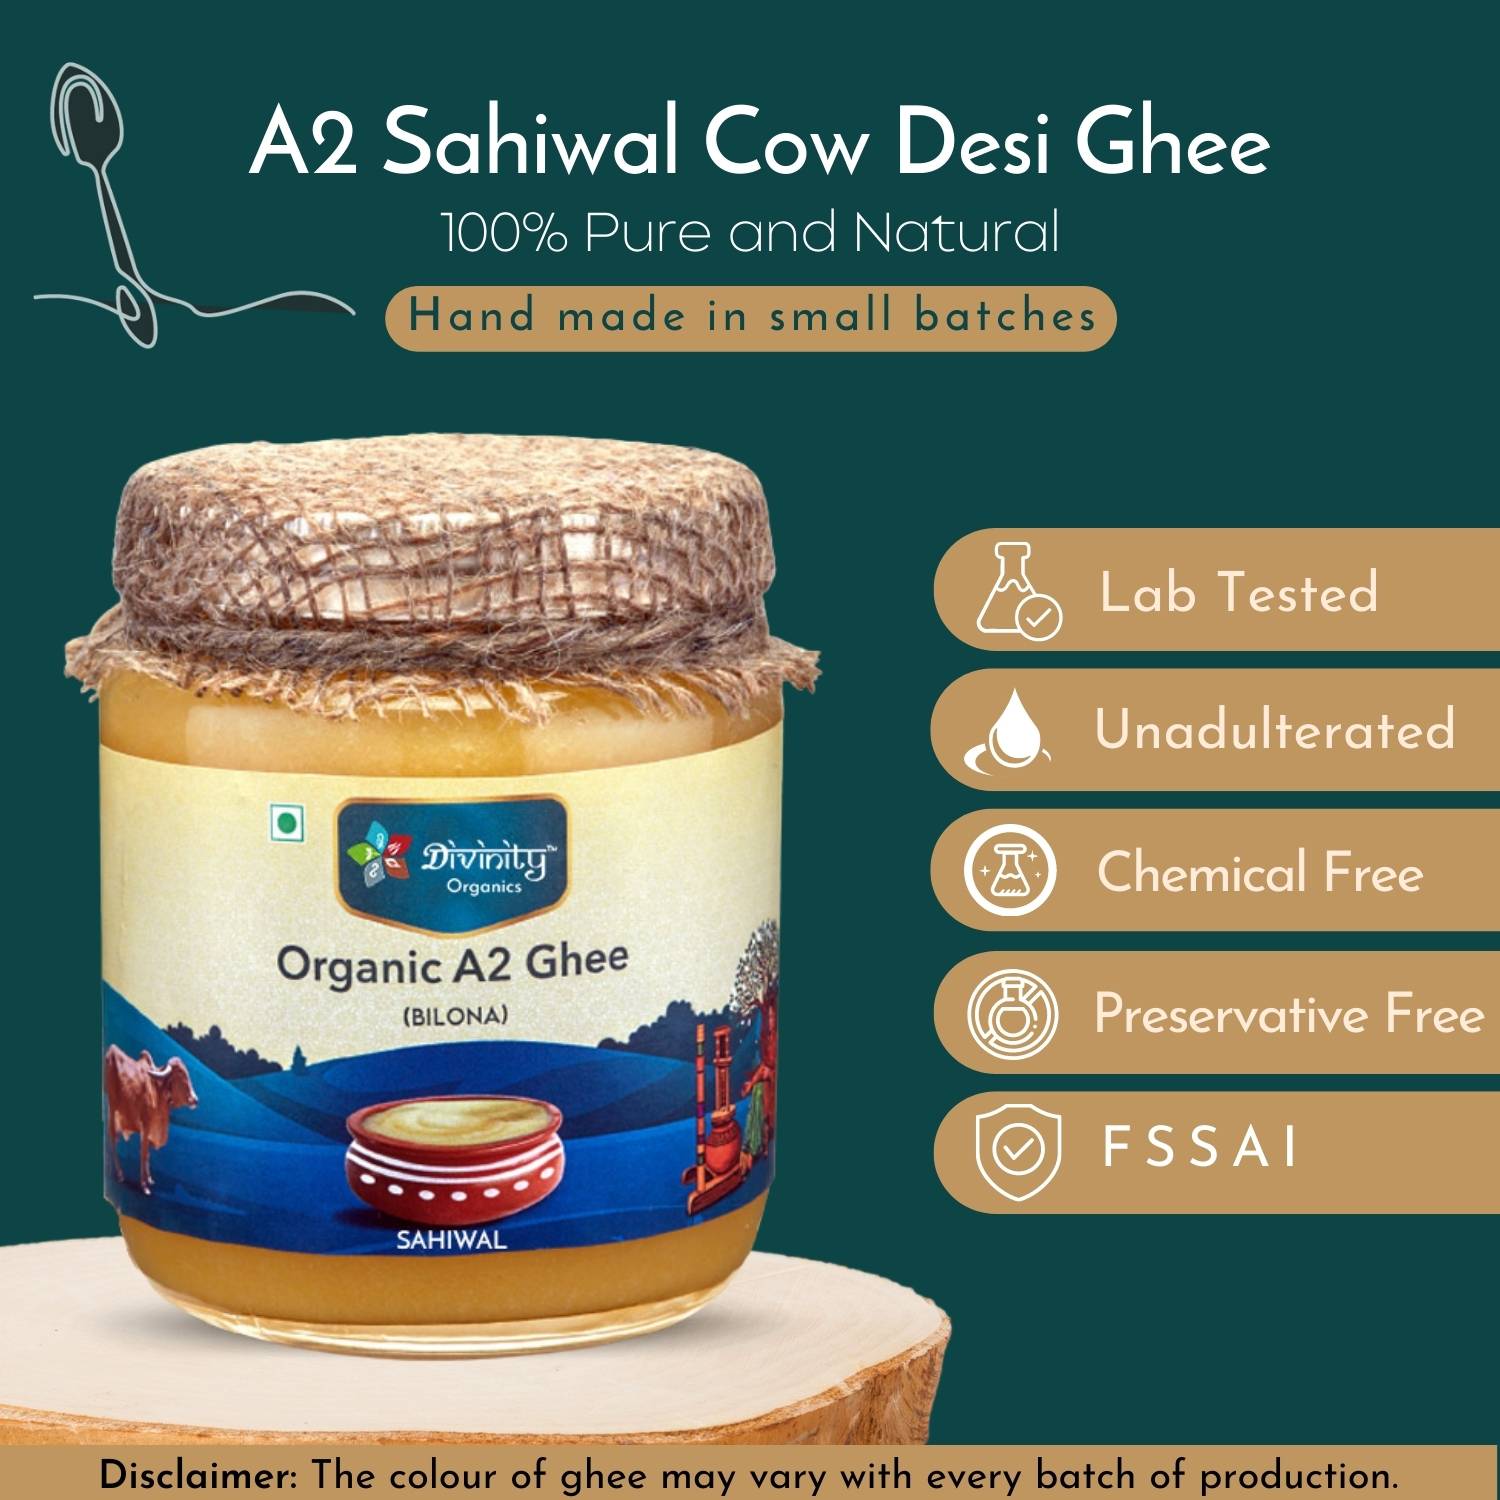 Divinity Organics A2 Cow Ghee Sahiwal Quality- 100% pure and natural